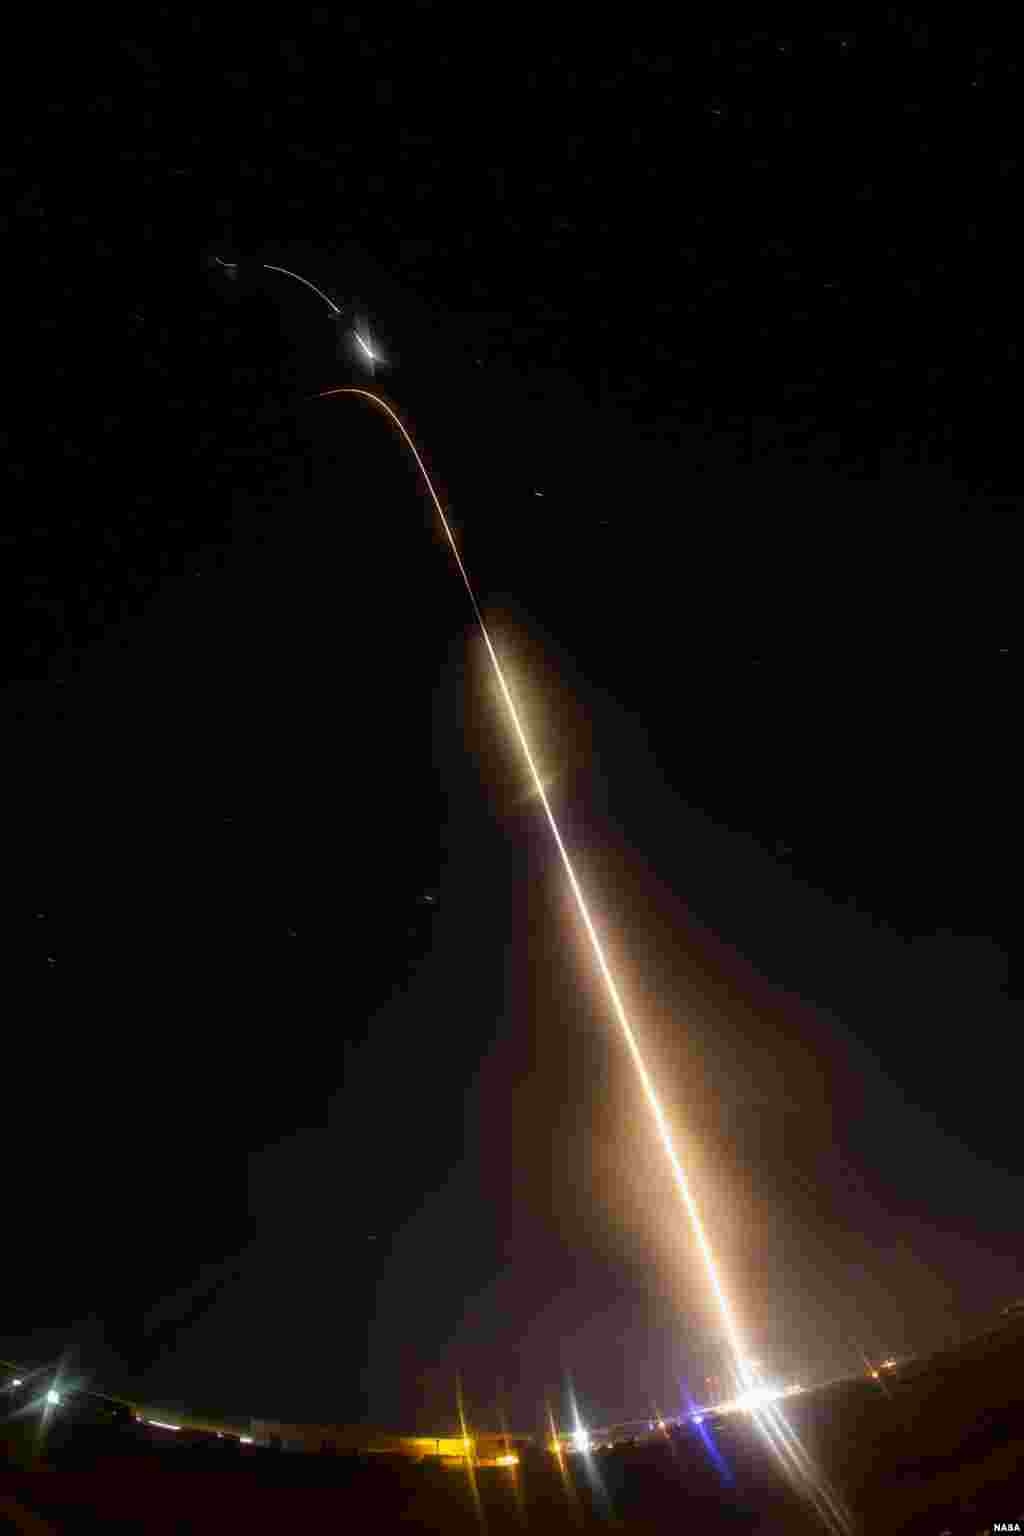 A NASA Black Brant XII suborbital rocket streaks into the night sky following its launch at 11:05 p.m. EDT on June 5, 2013 from the Wallops Flight Facility in Virginia. The rocket carried the Cosmic Infrared Background ExpeRiment (CIBER) to an altitude of approximately 358 miles above the Atlantic Ocean by the four-stage rocket.